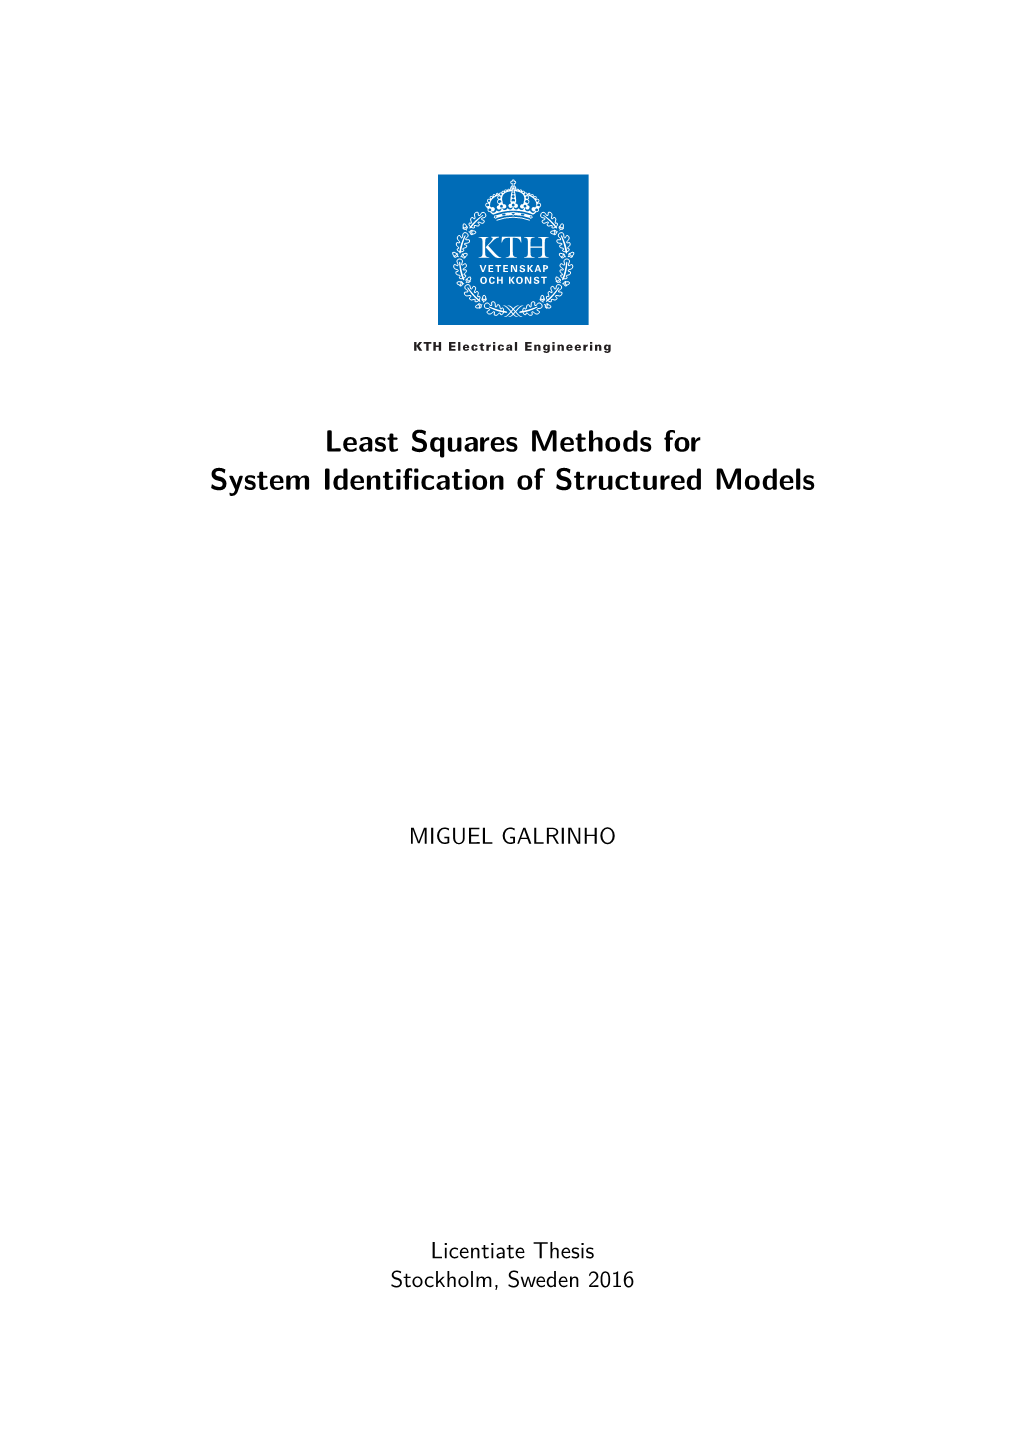 Least Squares Methods for System Identification of Structured Models